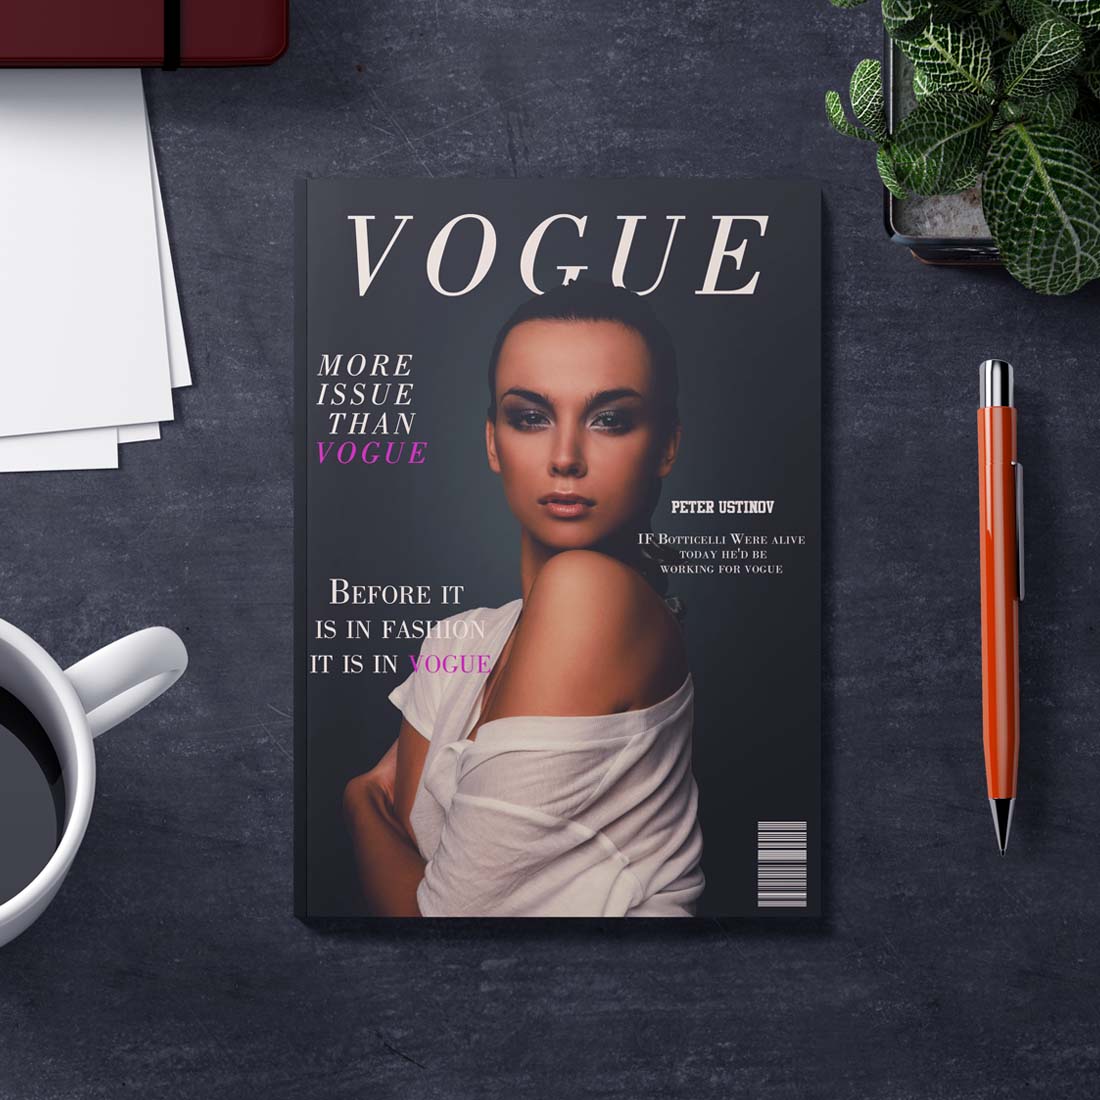 magazine cover design with jpg, psd and mockup file cover image.